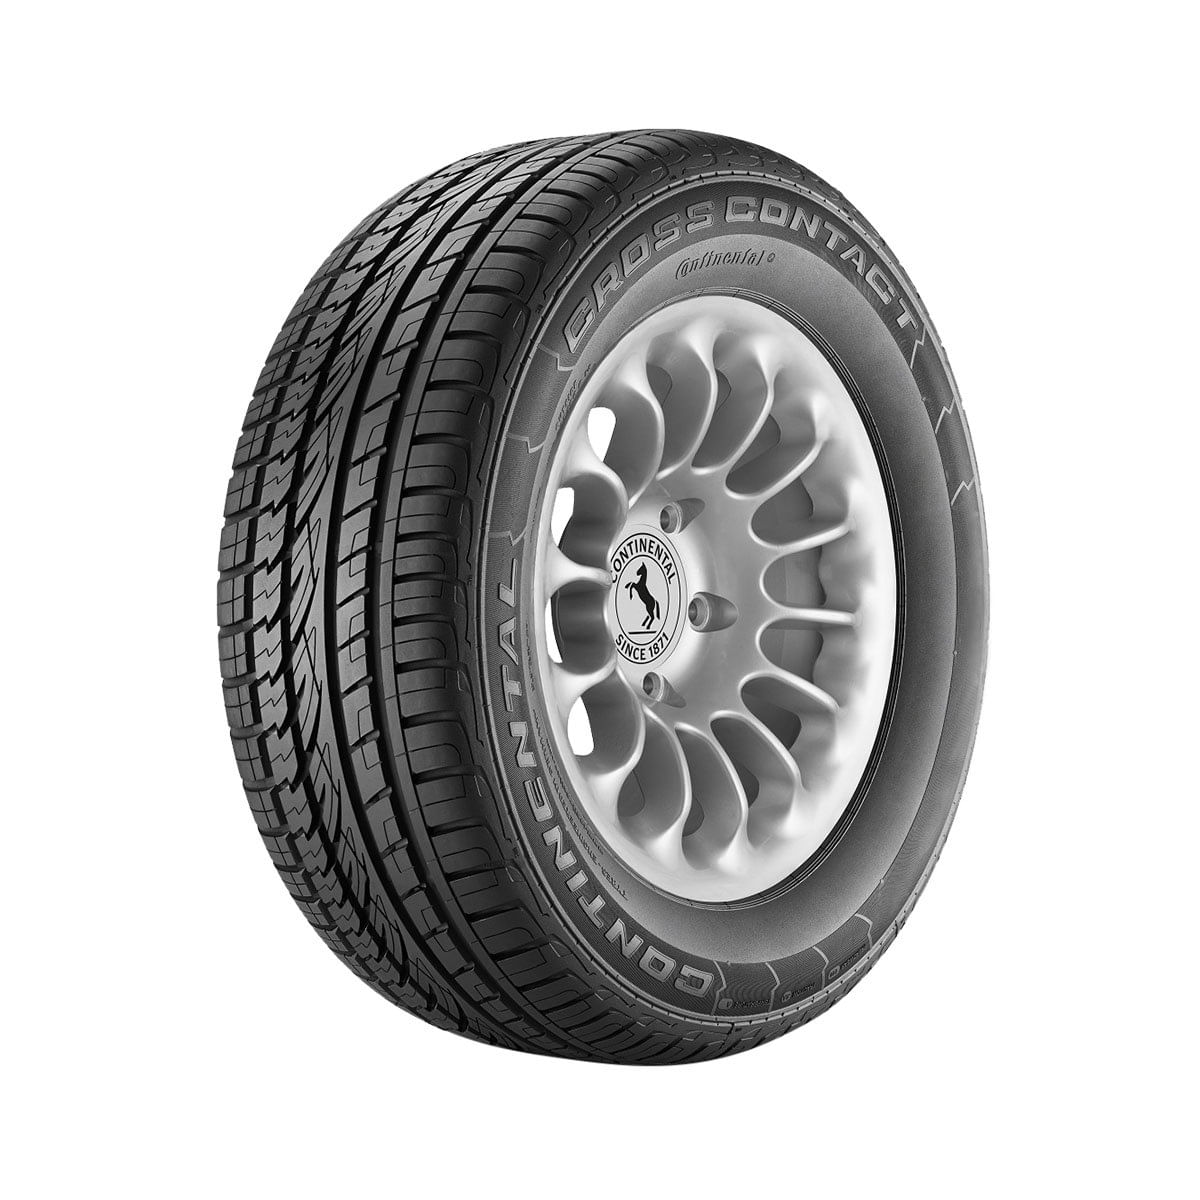 5744709_Pneu Aro 18 255/55 R 18 Continental CrossContact UHP 3590190000_1_Zoom